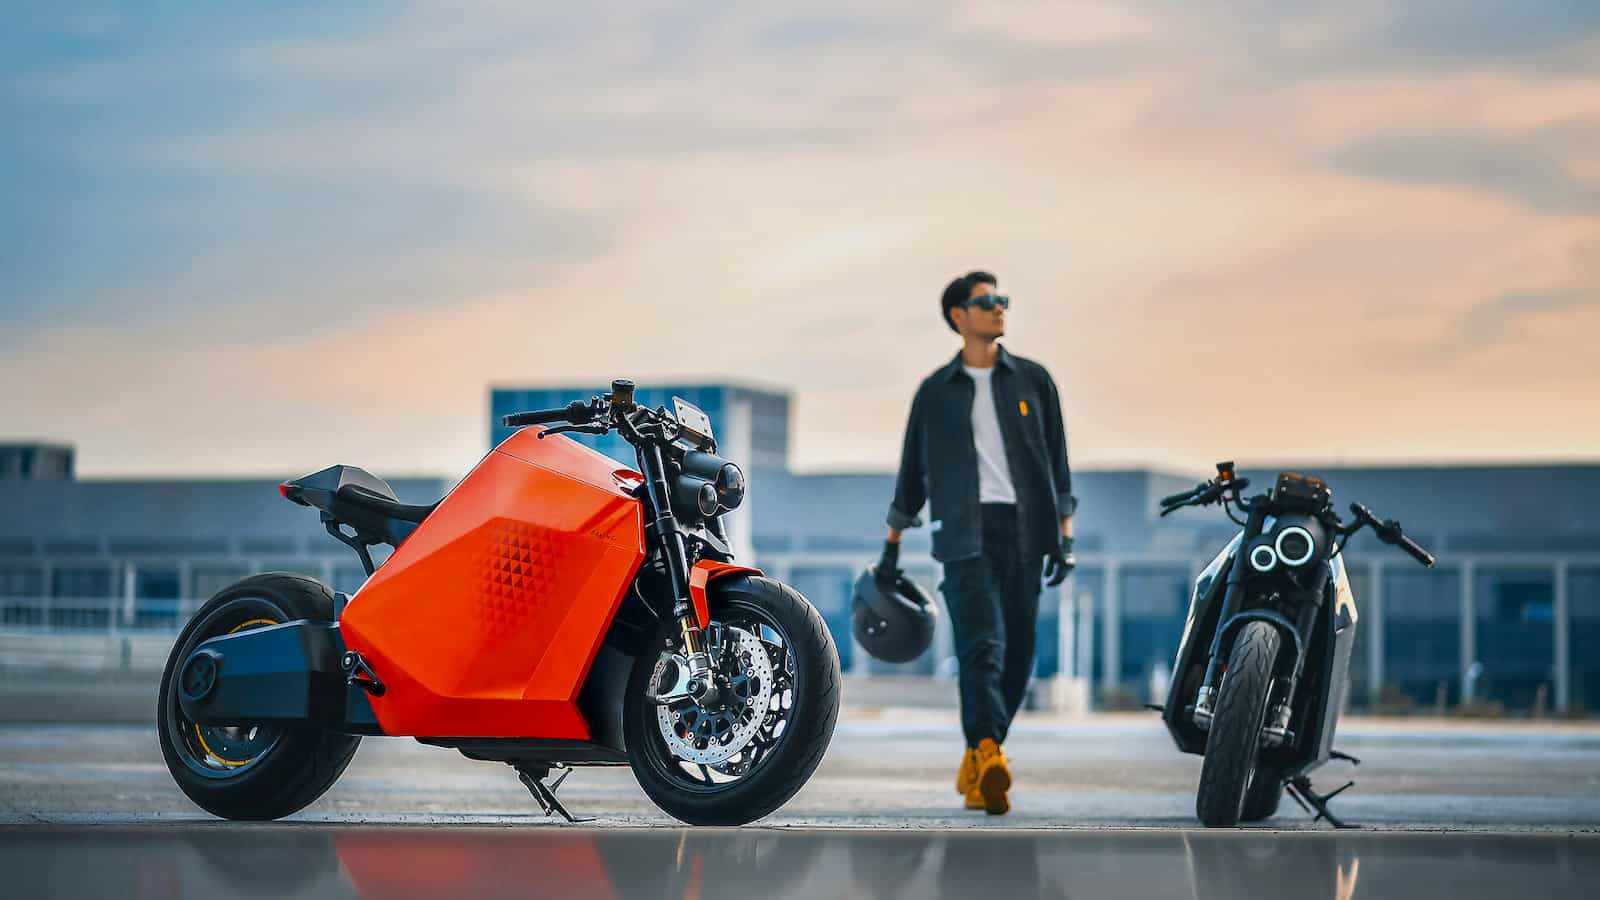 Davinci Motor's Futuristic Electric Motorcycle DC100 Set for US Launch at CES 2023